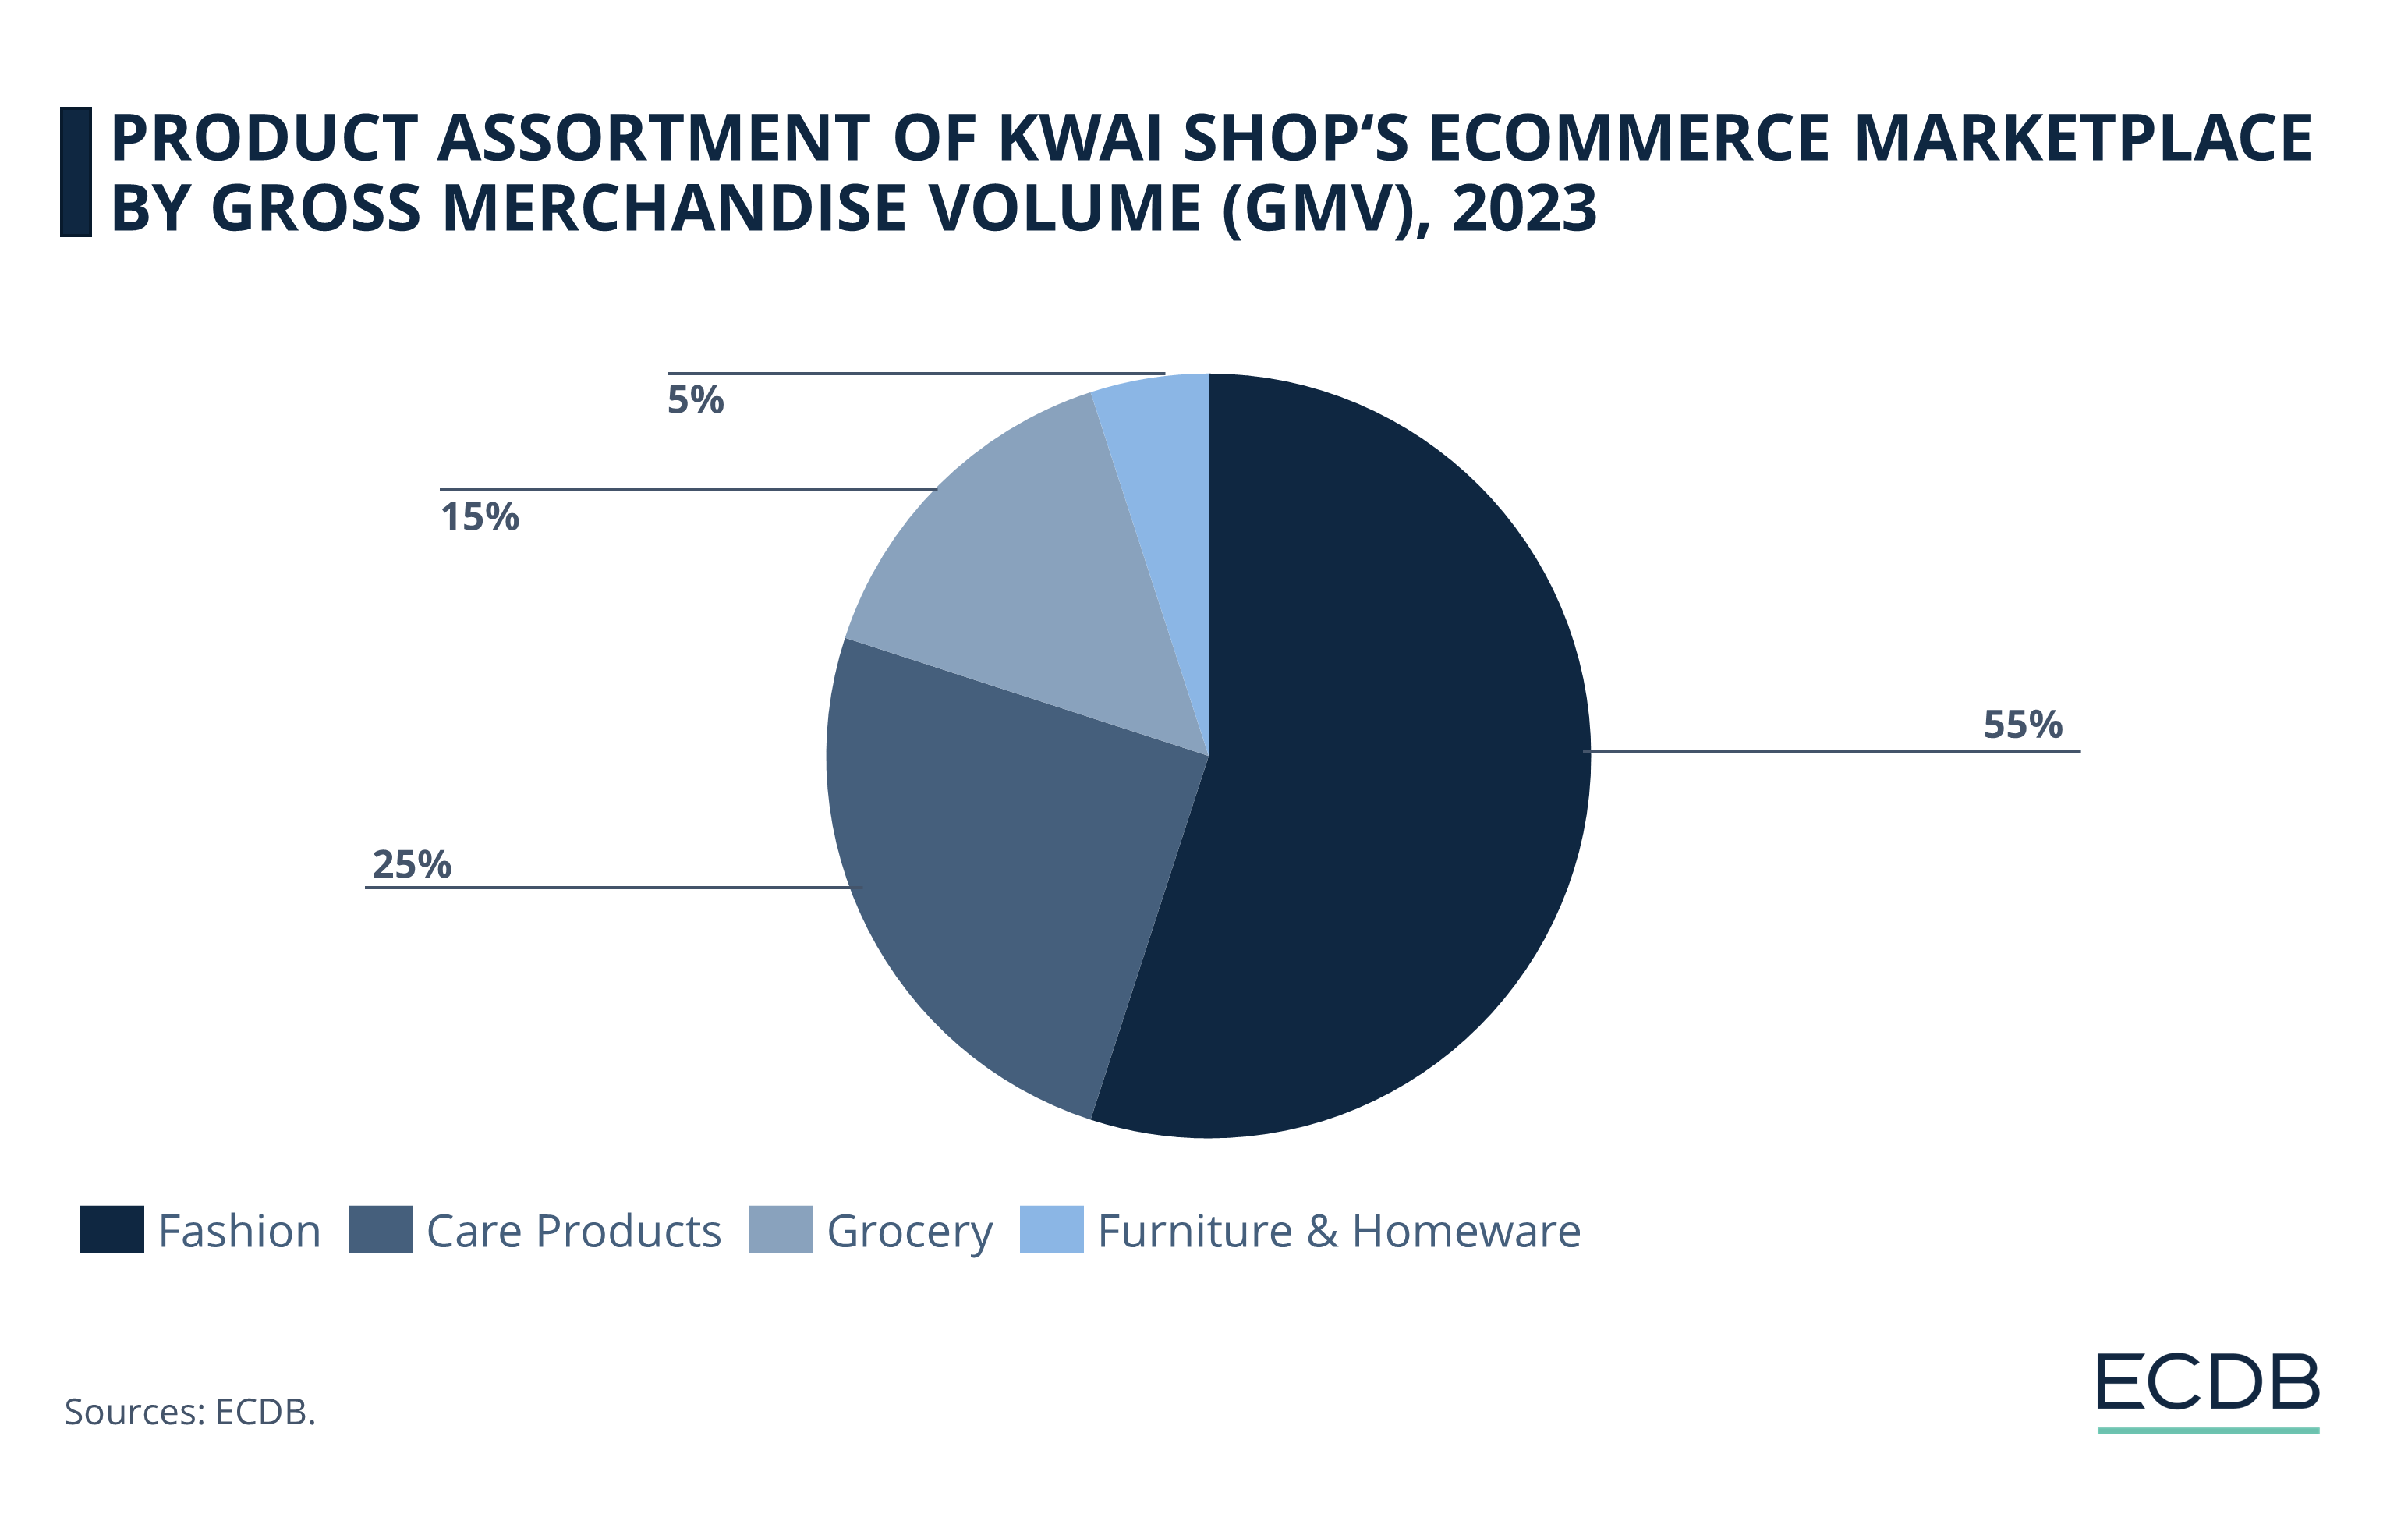 Product Assortment of Kwai Shop's eCommerce Marketplace by GMV, 2023